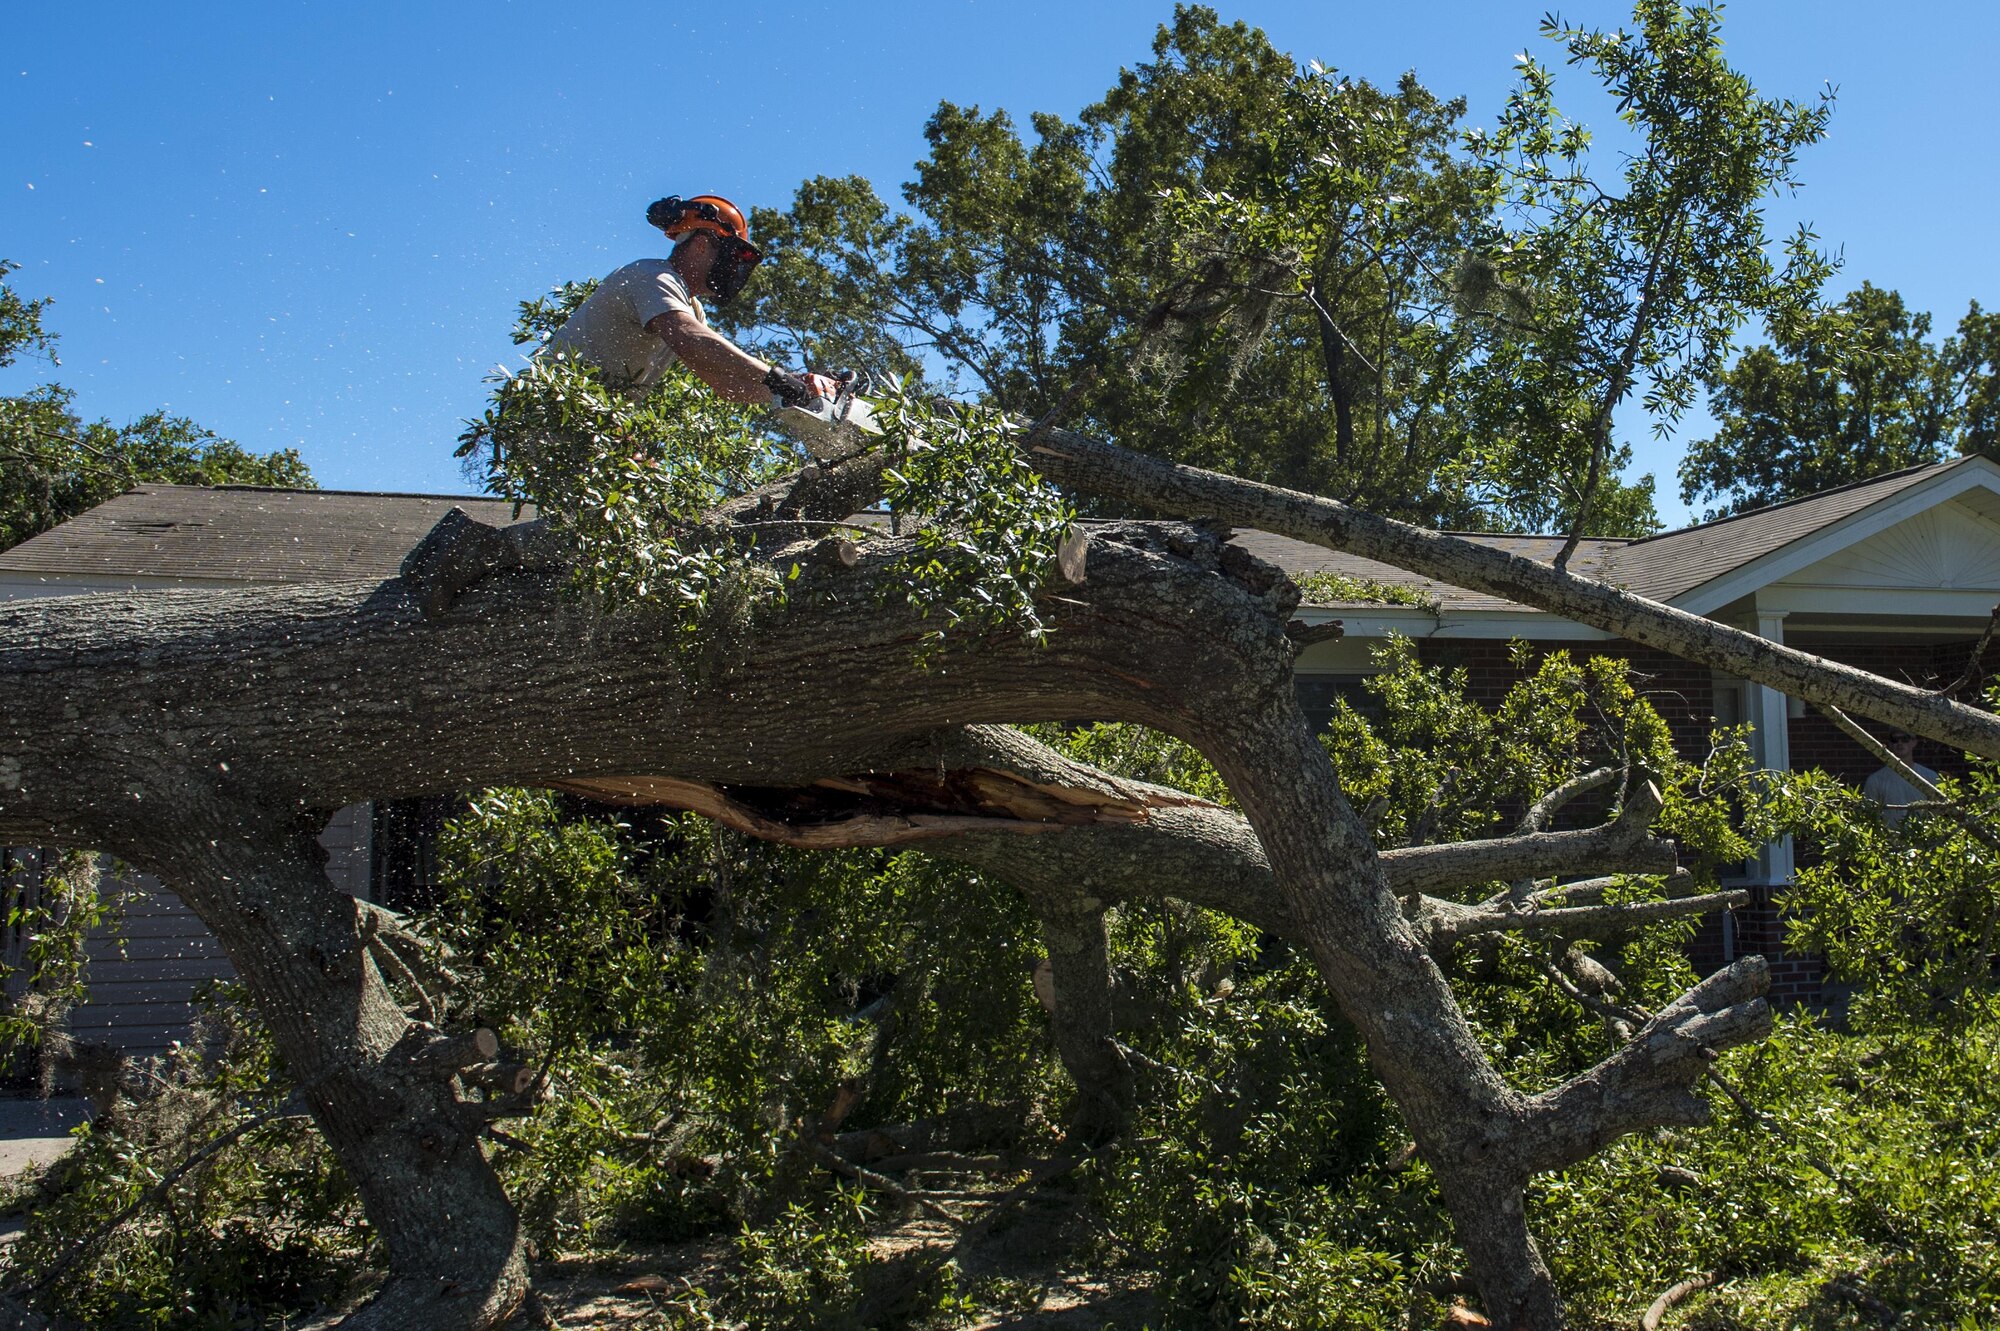 U.S. Air Force Senior Airman Jesse Steinberg, heavy equipment operators with the 628th Civil Engineer Squadron, removes a fallen tree after  Hurricane Mathew swept through Hunley Park-Air Base housing, S.C., Oct. 9, 2016.   All non-essential personnel evacuated the area, but returned after disaster response coordinators assessed damage and verified a safe operating environment.